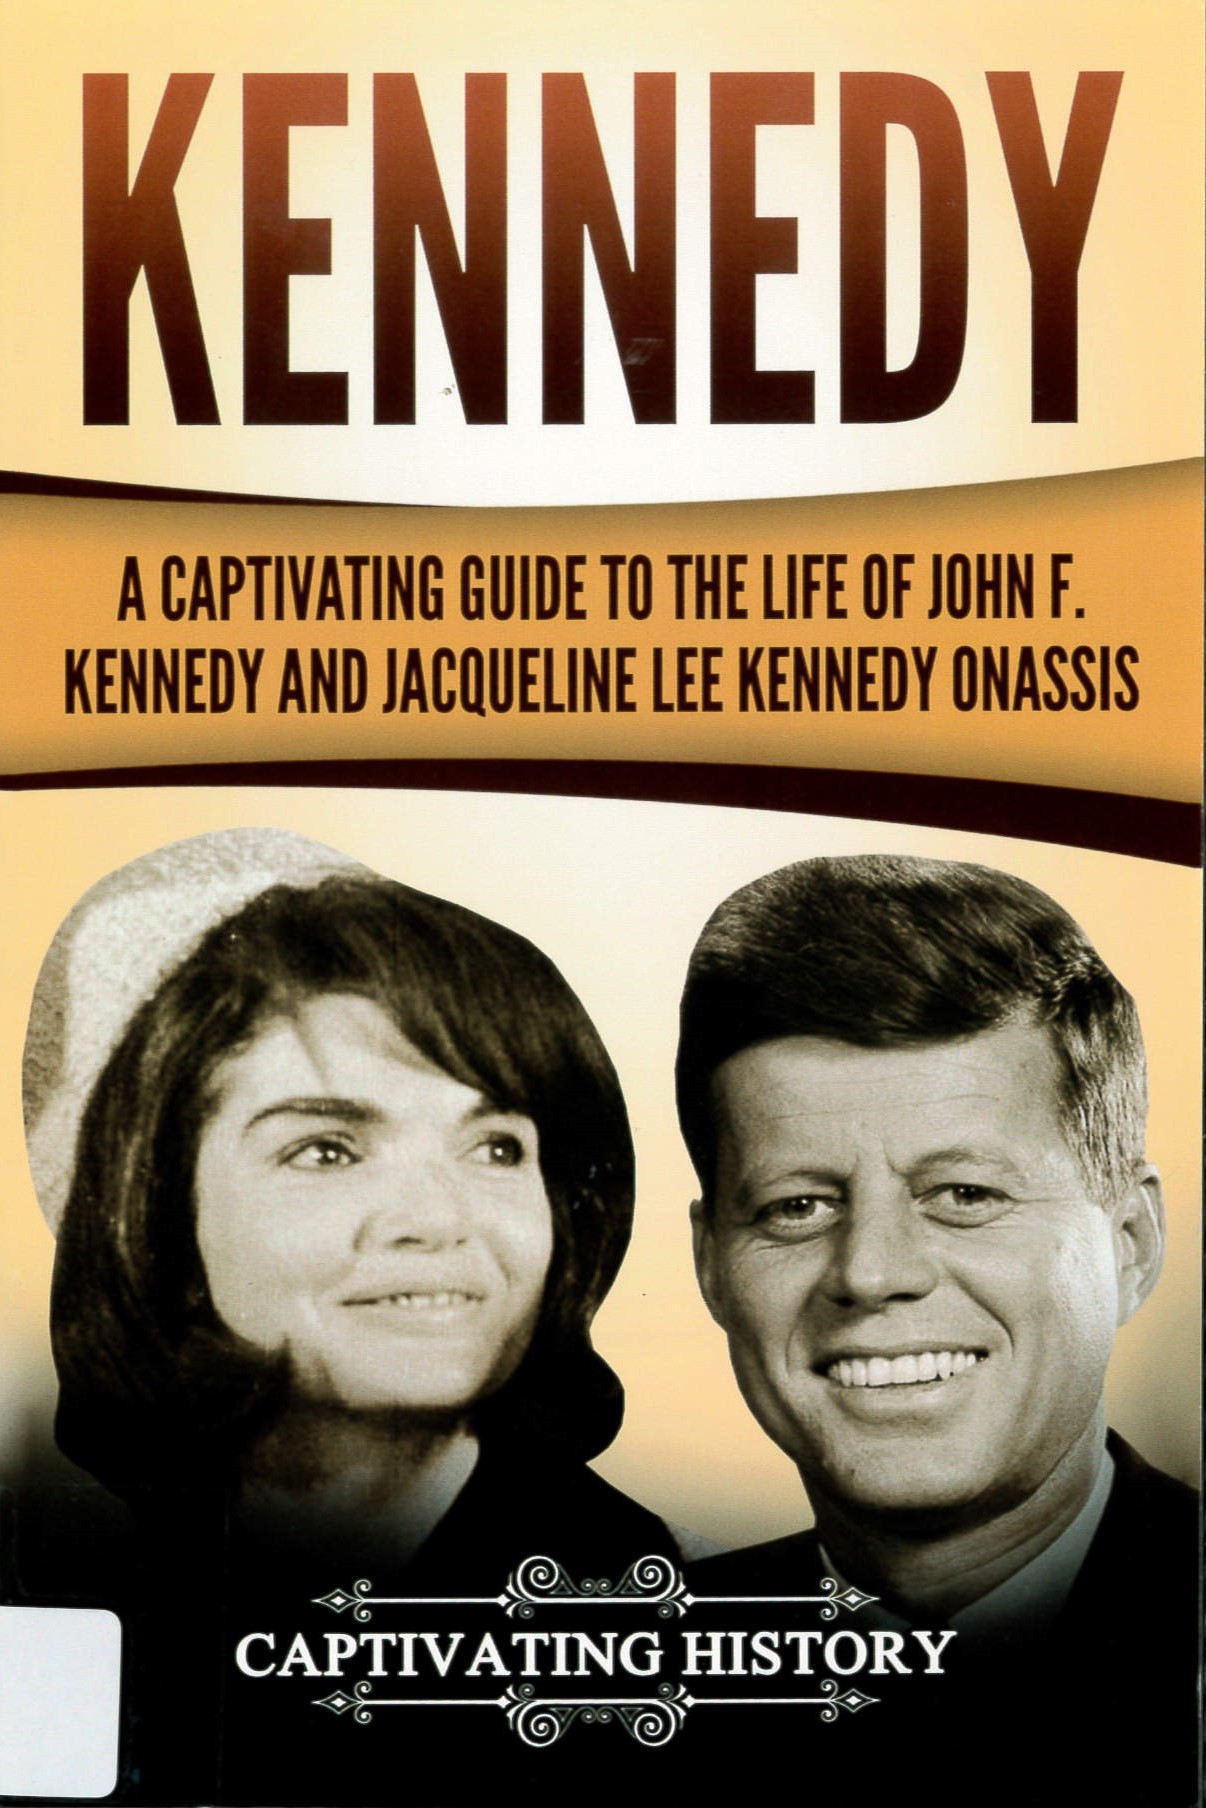 Kennedy : A Captivating Guide to the Life of John F. Kennedy and Jacqueline Lee Kennedy Onassis.